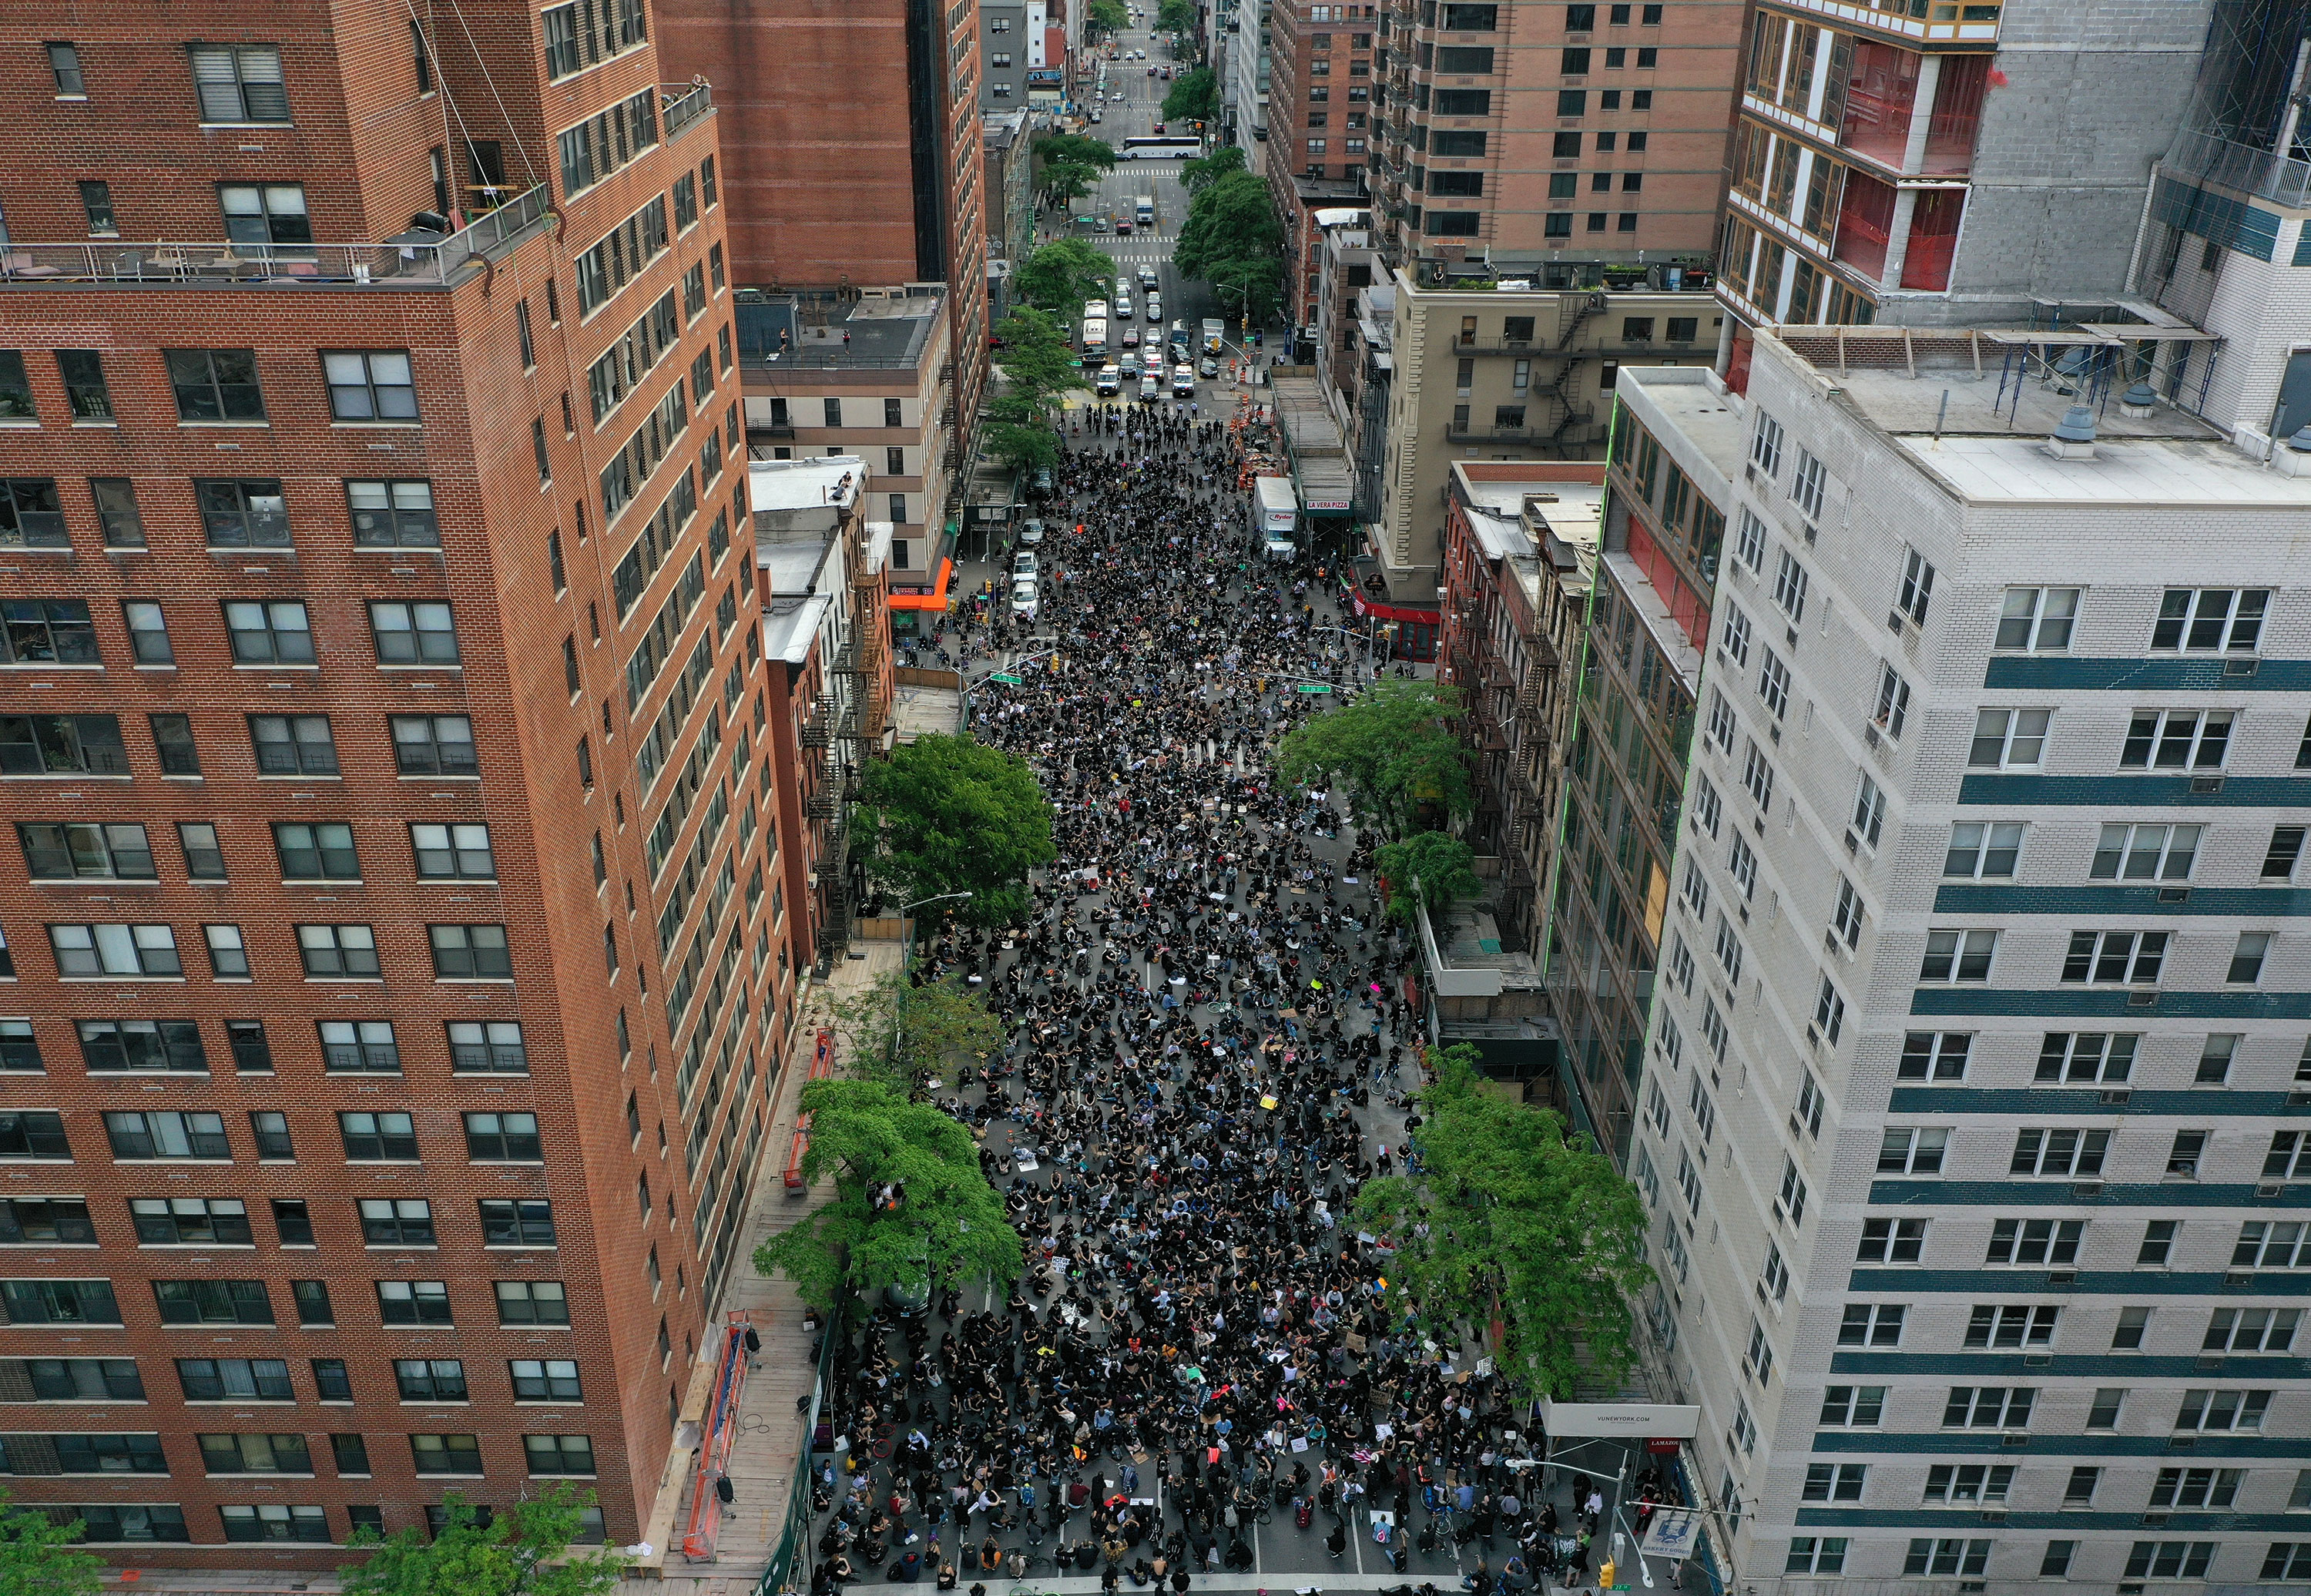 Protesters gather in the streets of Manhattan on June 2, in New York.